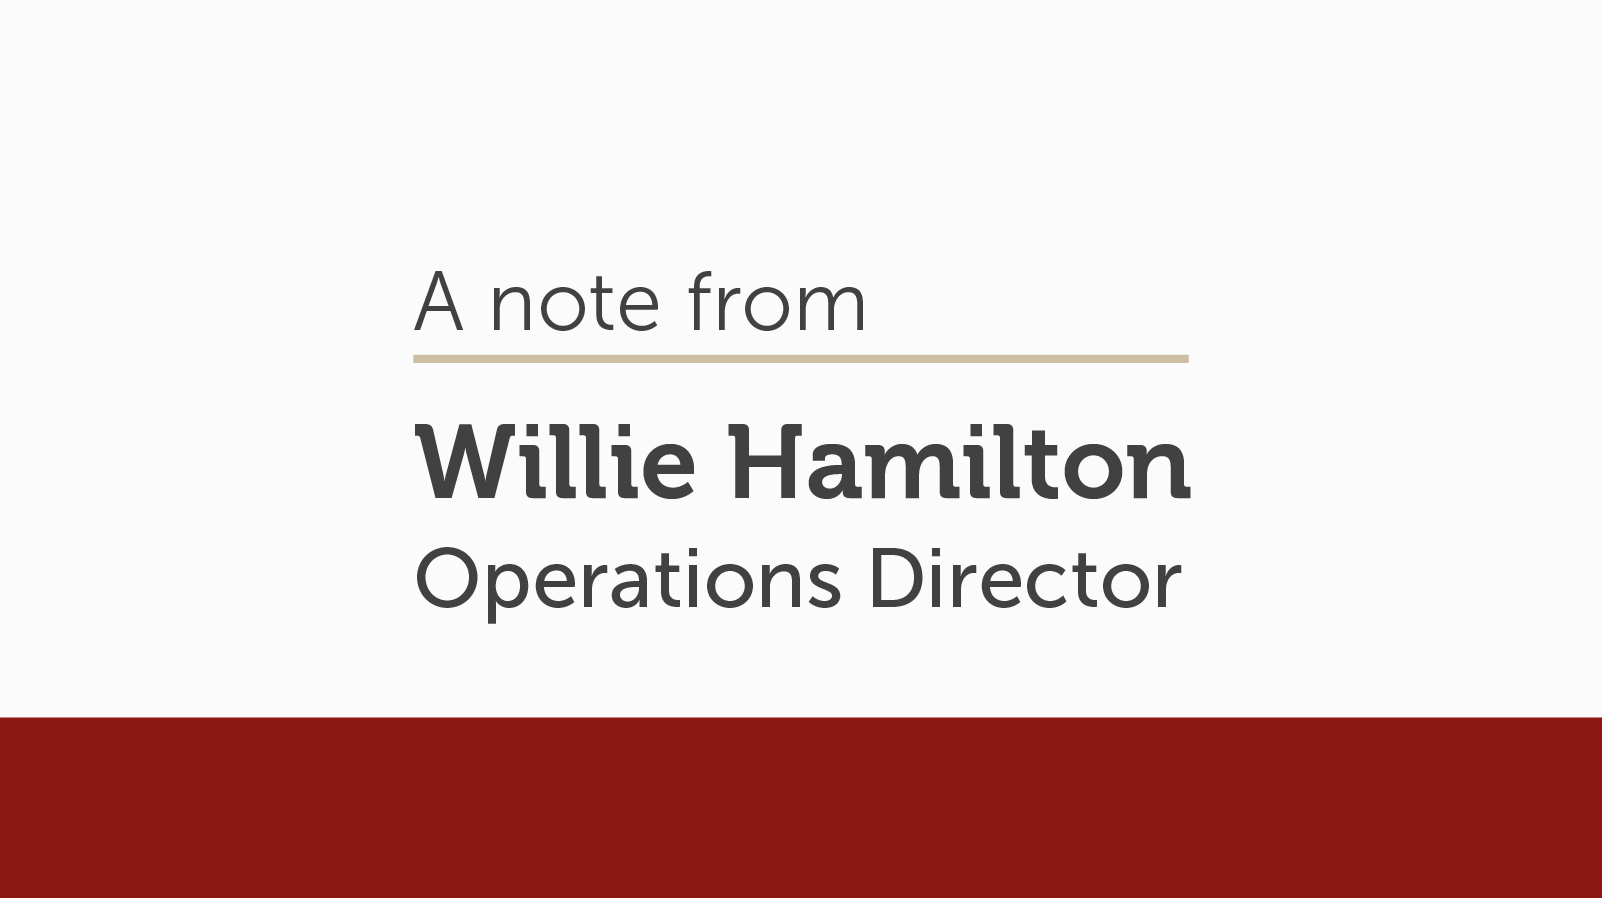 Message from Willie Hamilton, Operations Director